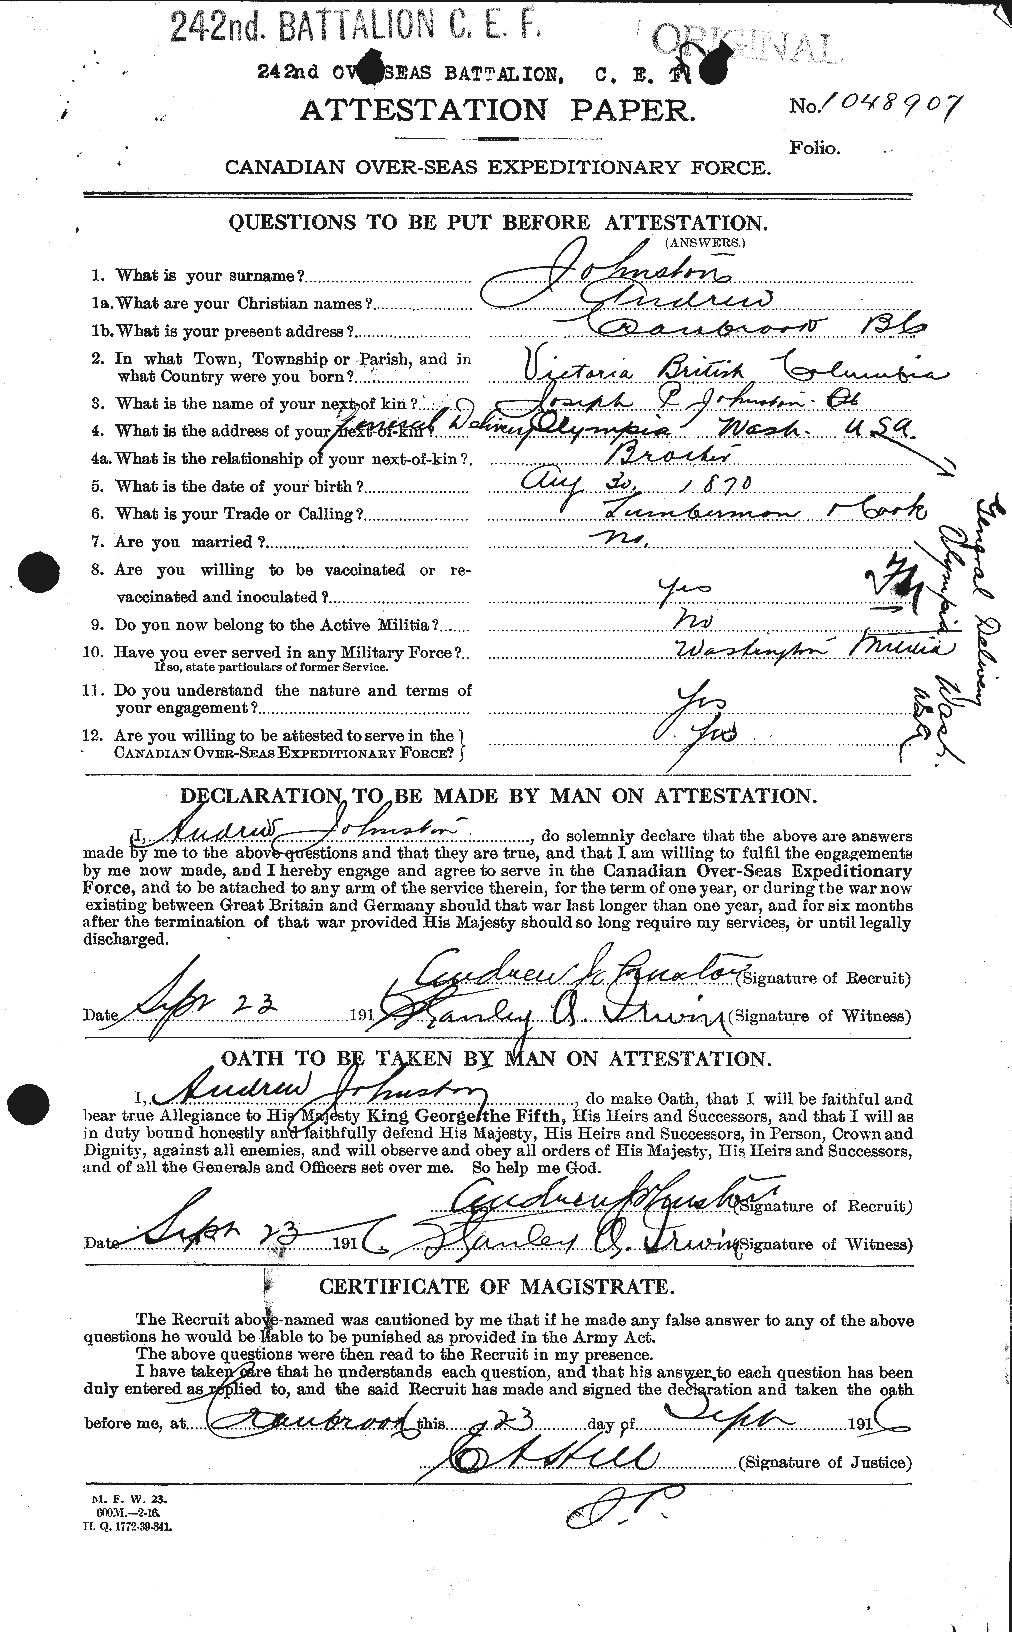 Personnel Records of the First World War - CEF 421007a